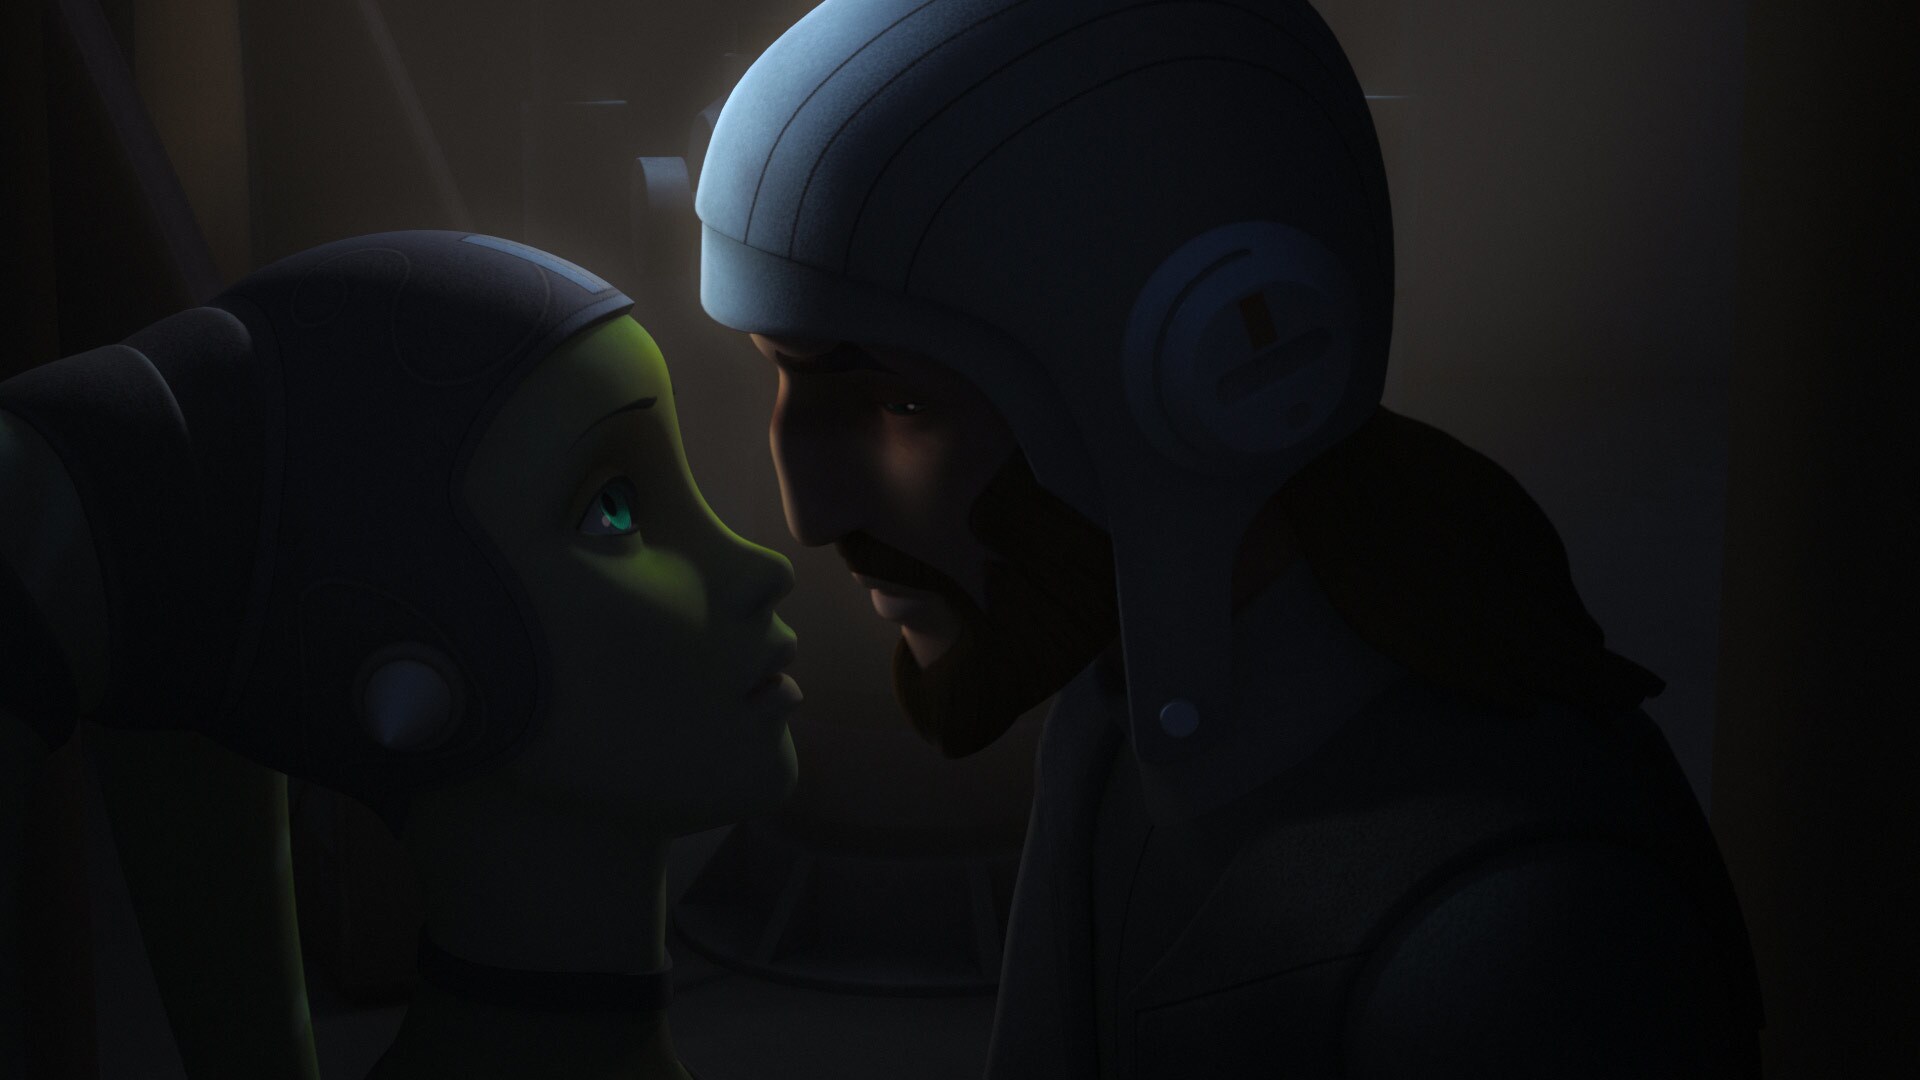 Elsewhere, Kanan and Hera hide from a patrol and share a moment. He wishes he could see her. "You...